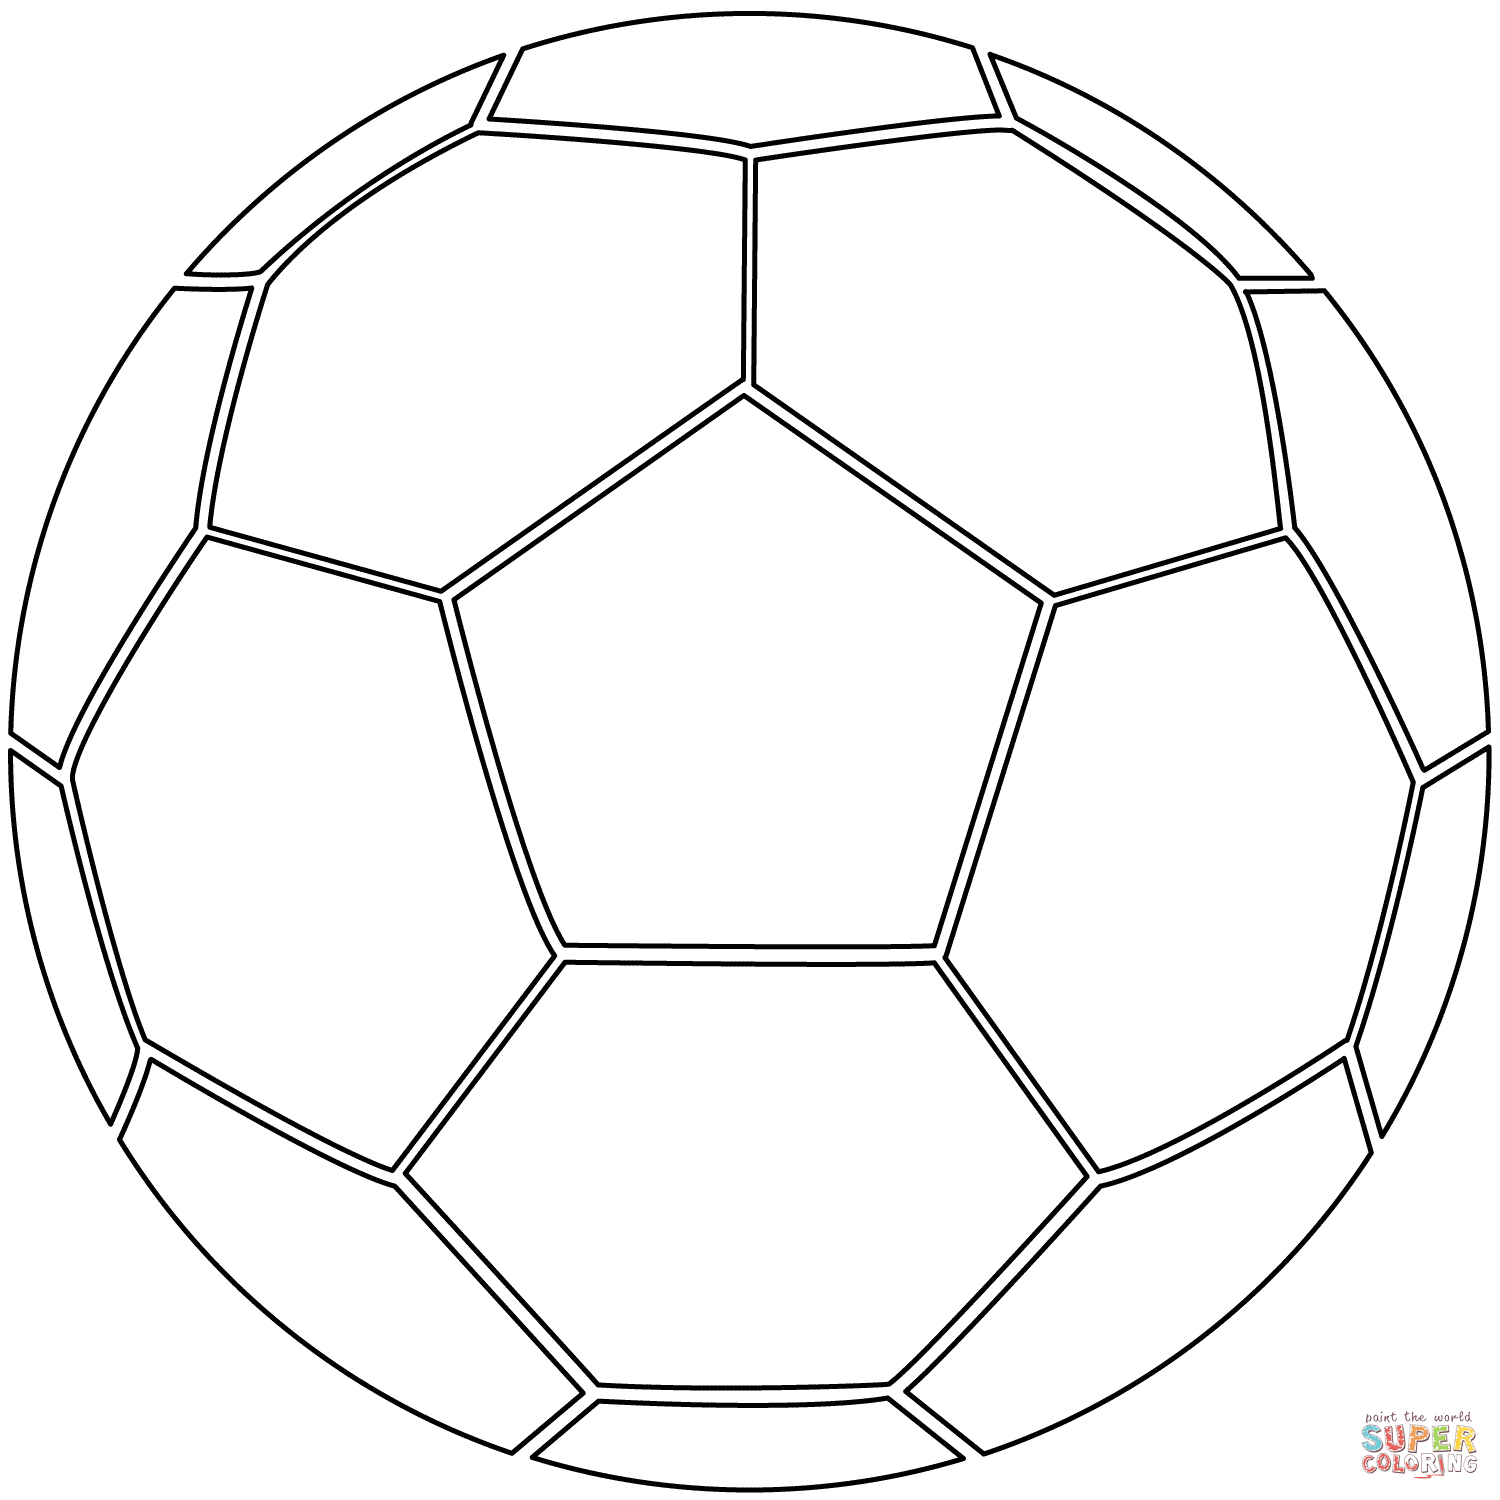 Free Printable Soccer Ball Coloring Page - Coloring pages